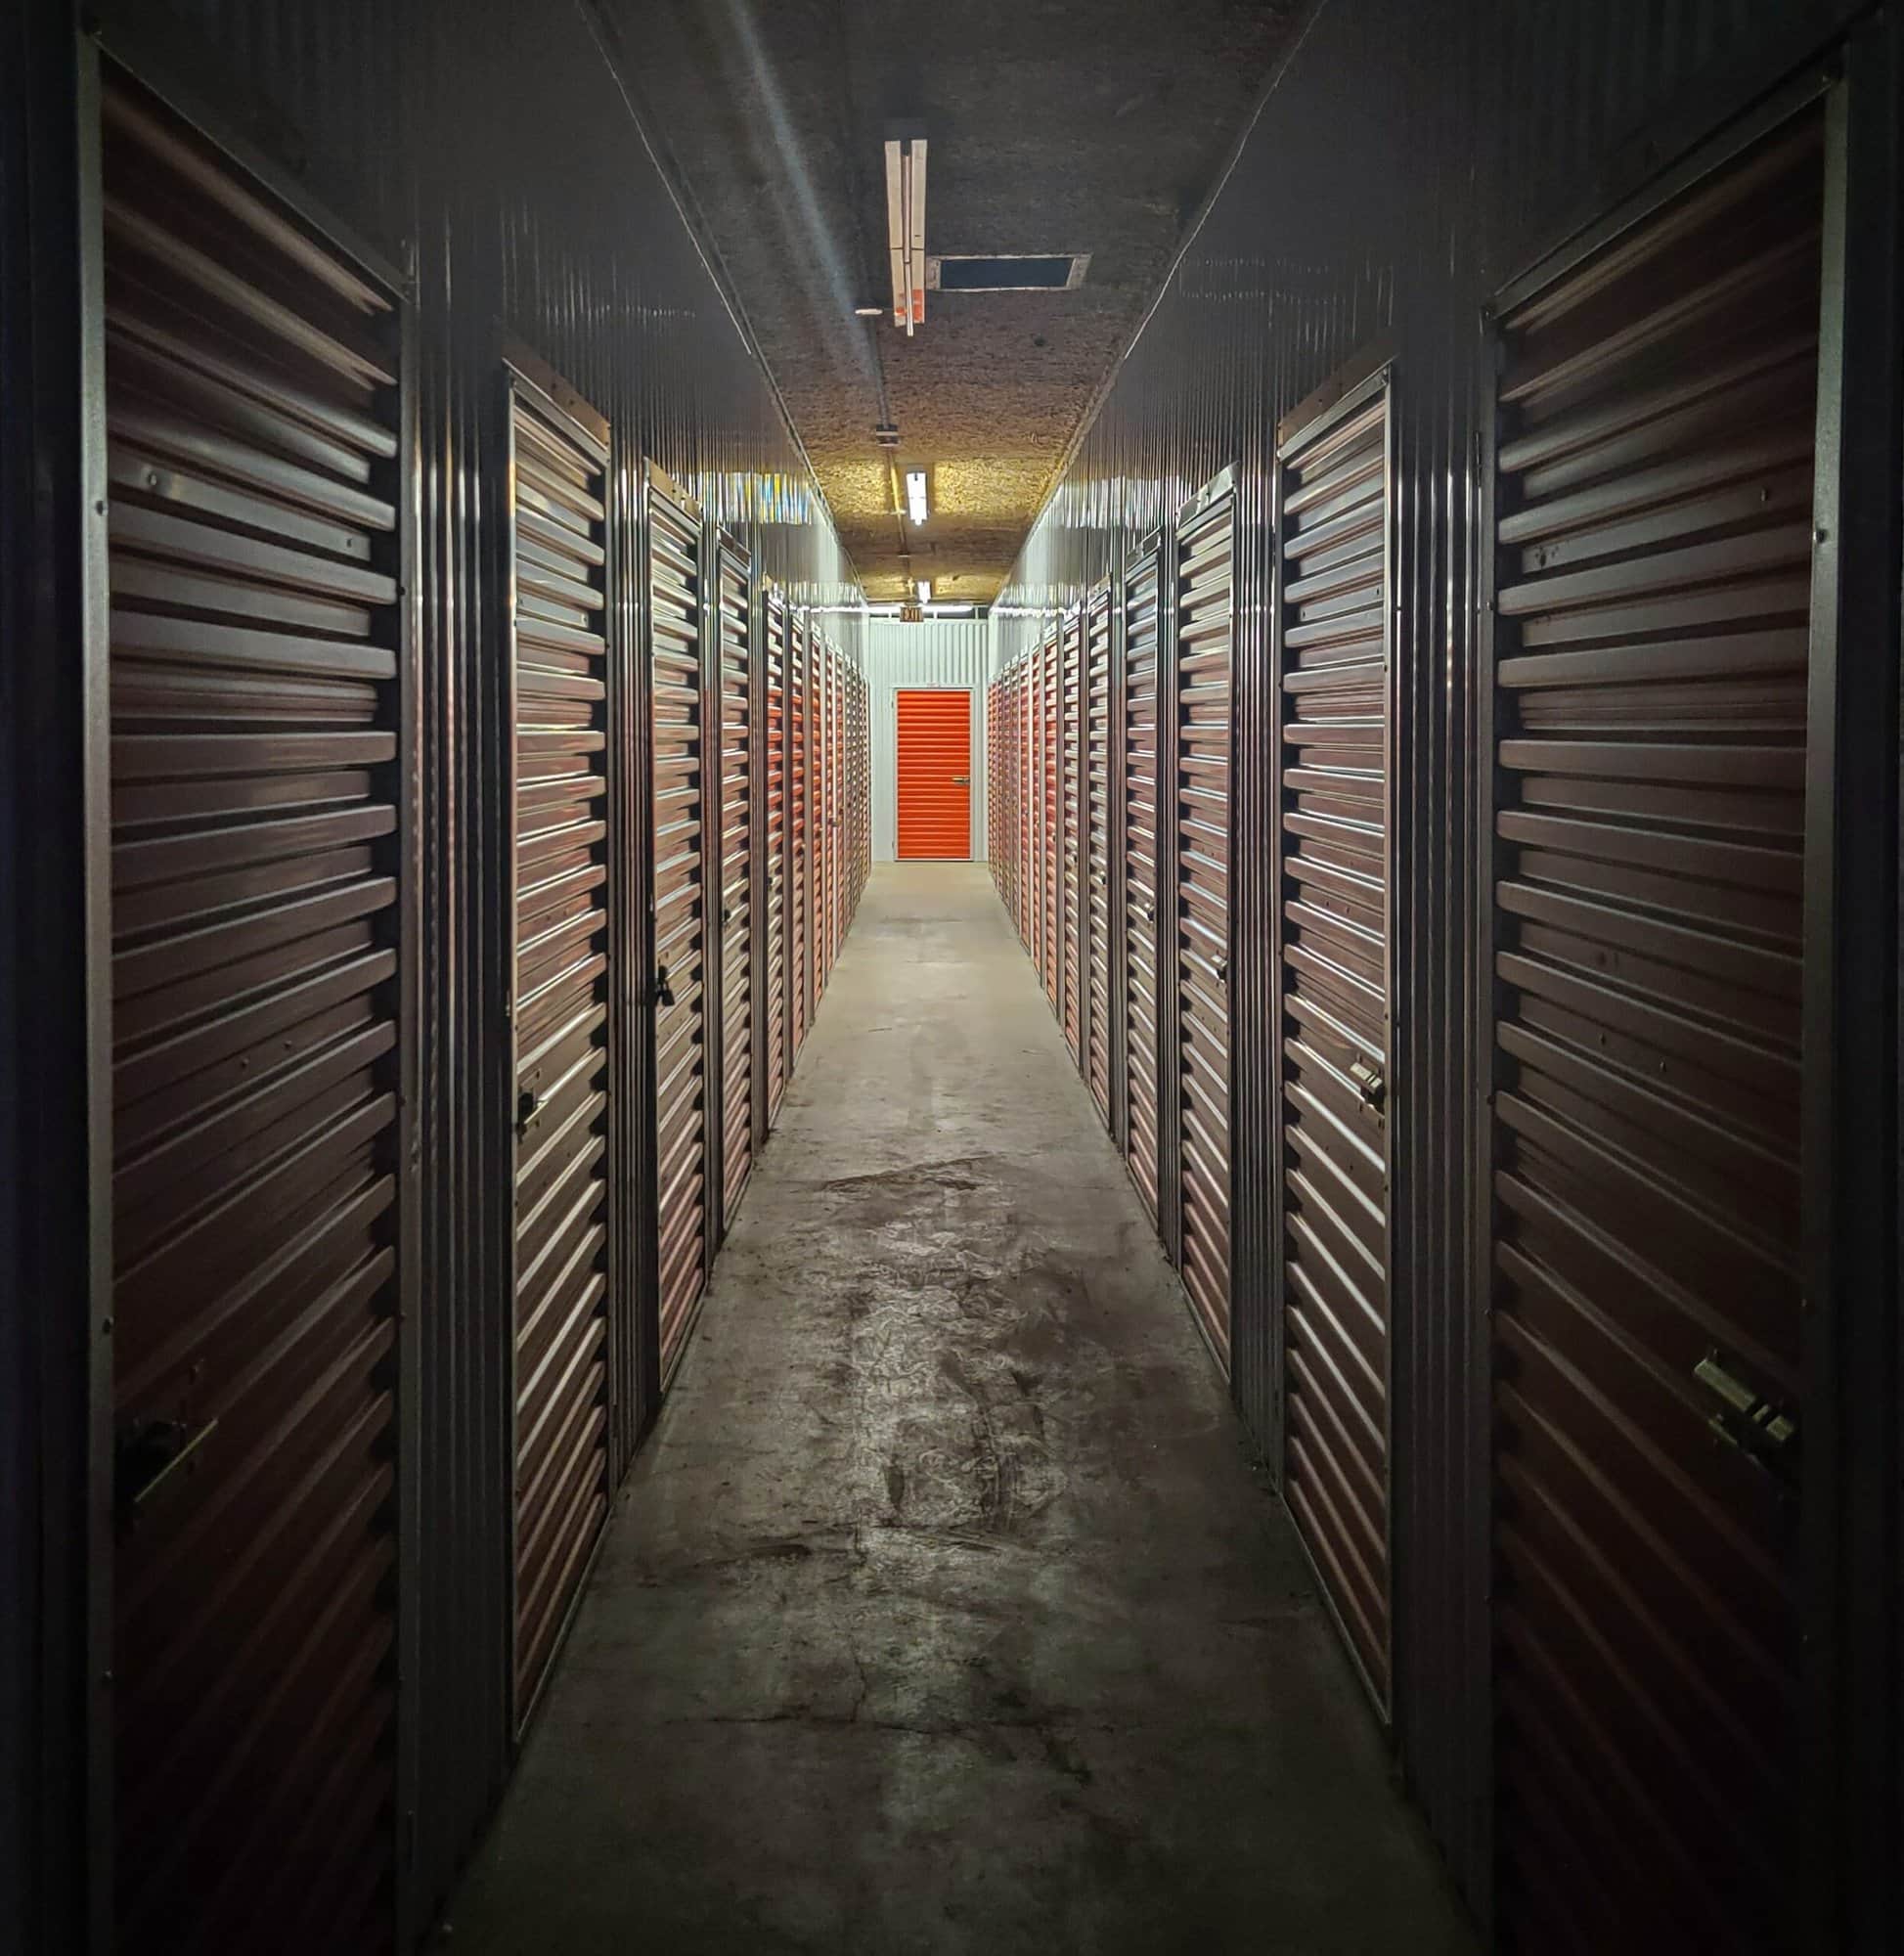 Self storage units in a hallway with a red door equipped with security cameras.